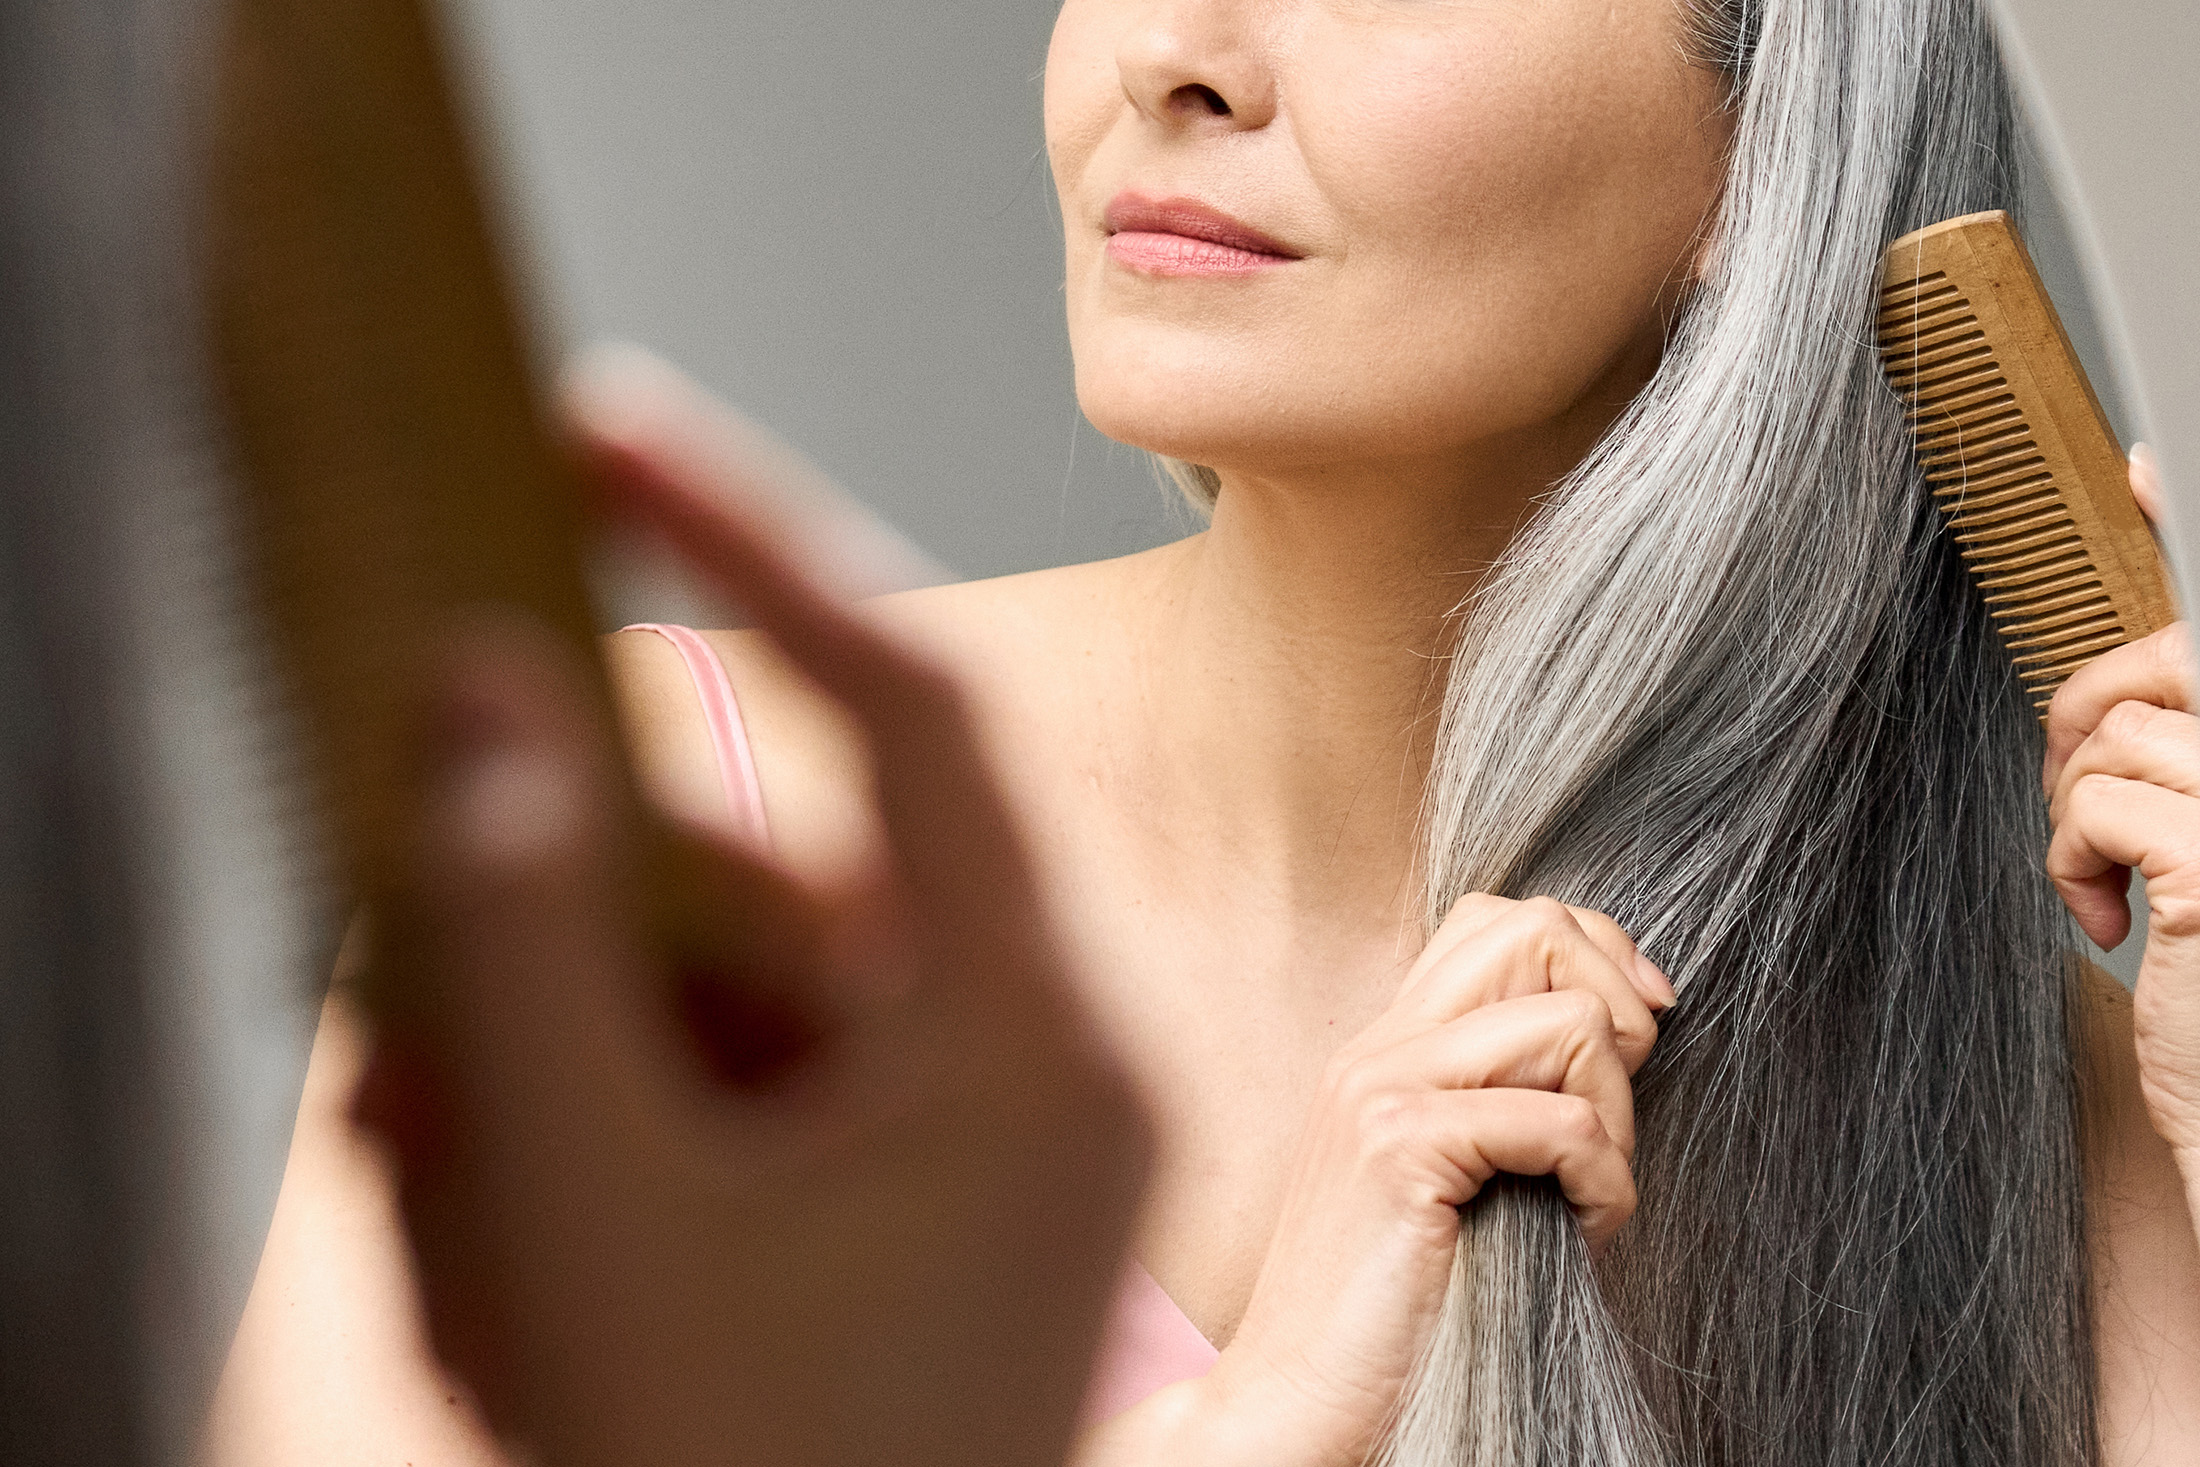 Mature mid aged senior Asian woman looking at mirror combing her gray hair.